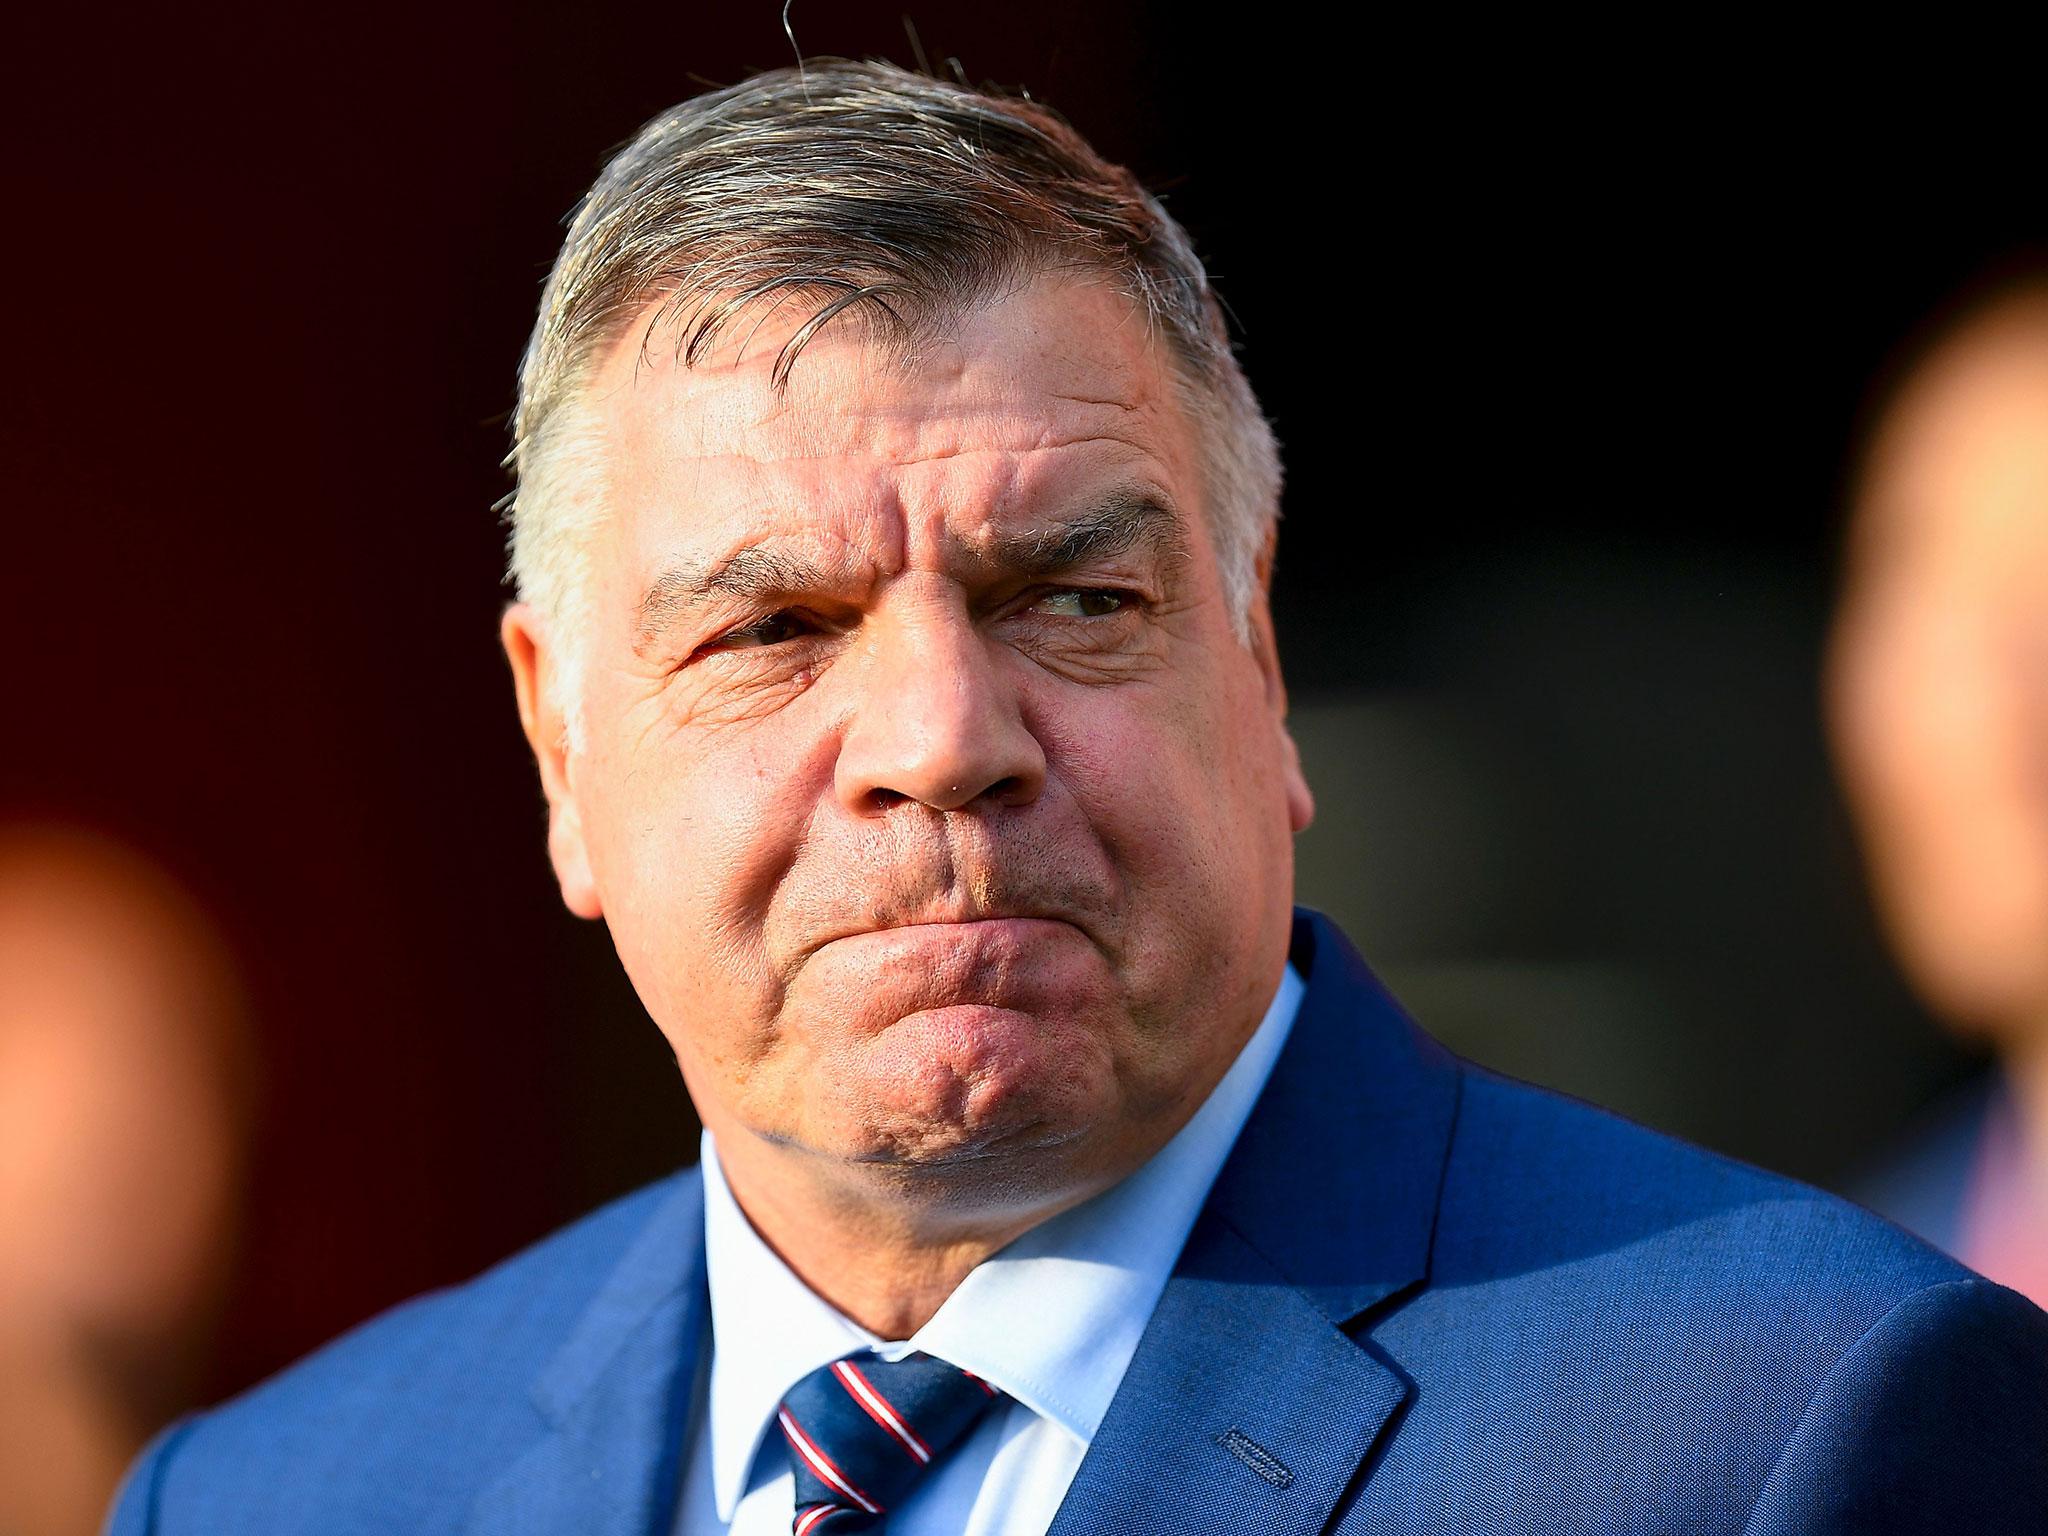 Sam Allardyce is expected to be named Crystal Palace manager before the match with Watford on Boxing Day